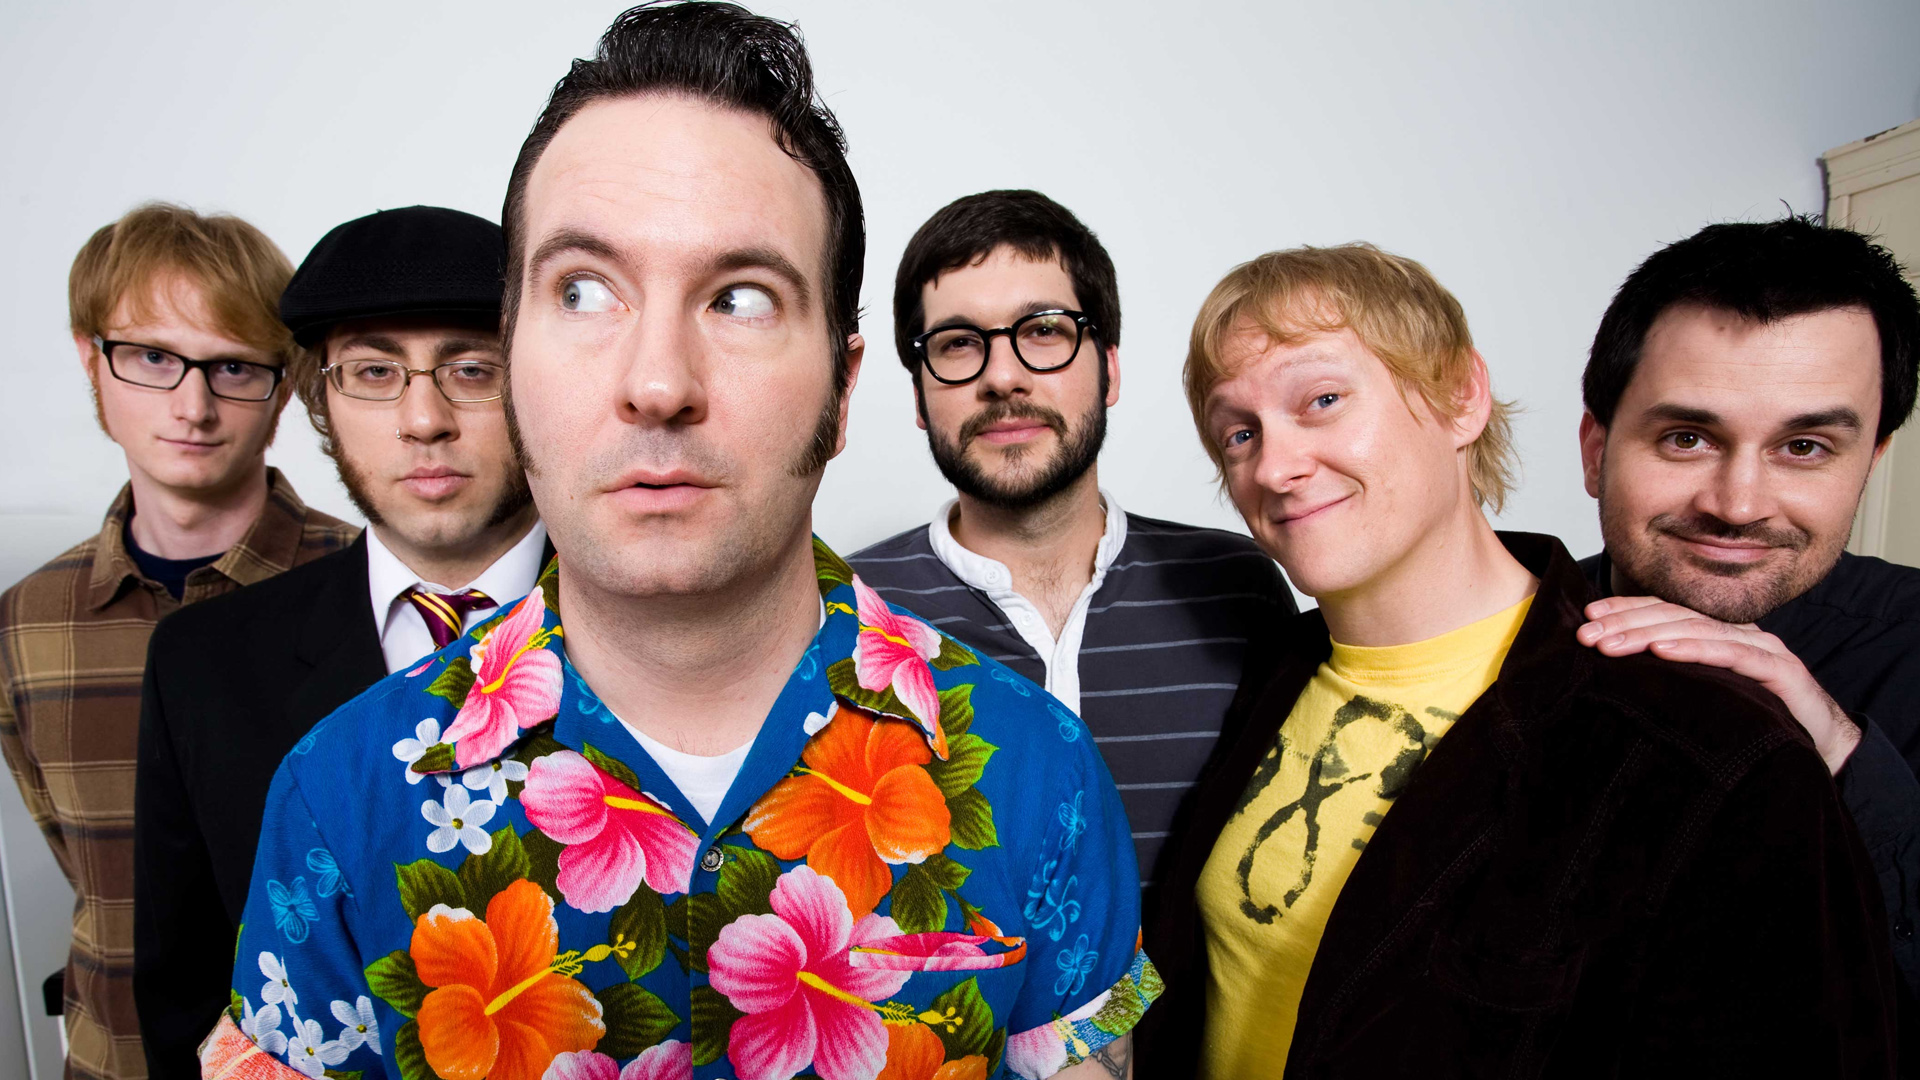 Where Have You Been? av Reel Big Fish